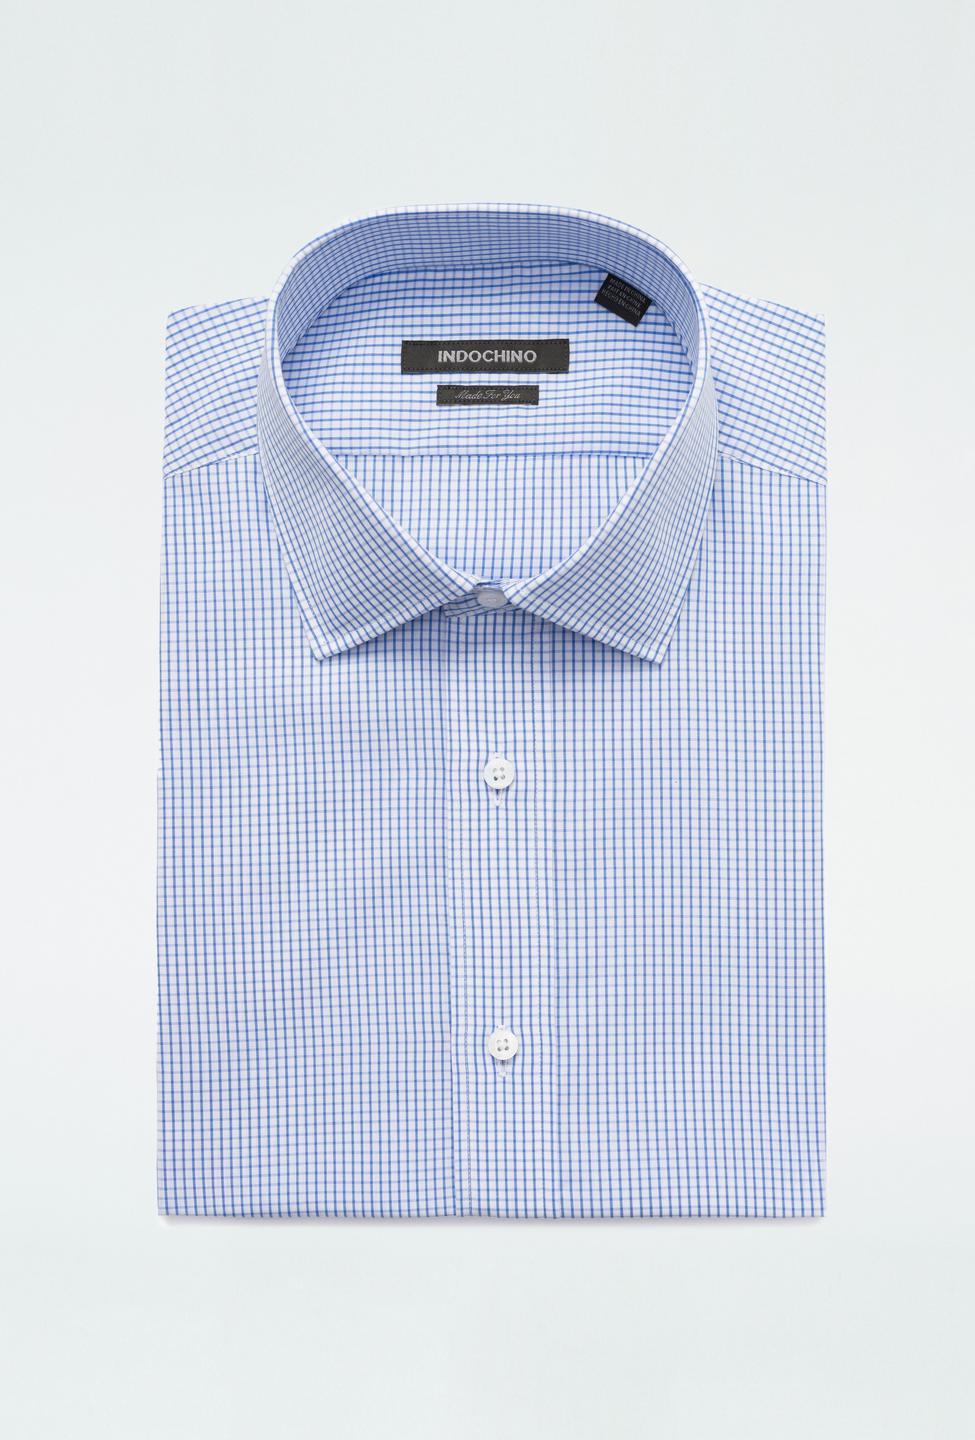 Blue shirt - Harlow Checked Design from Premium Indochino Collection